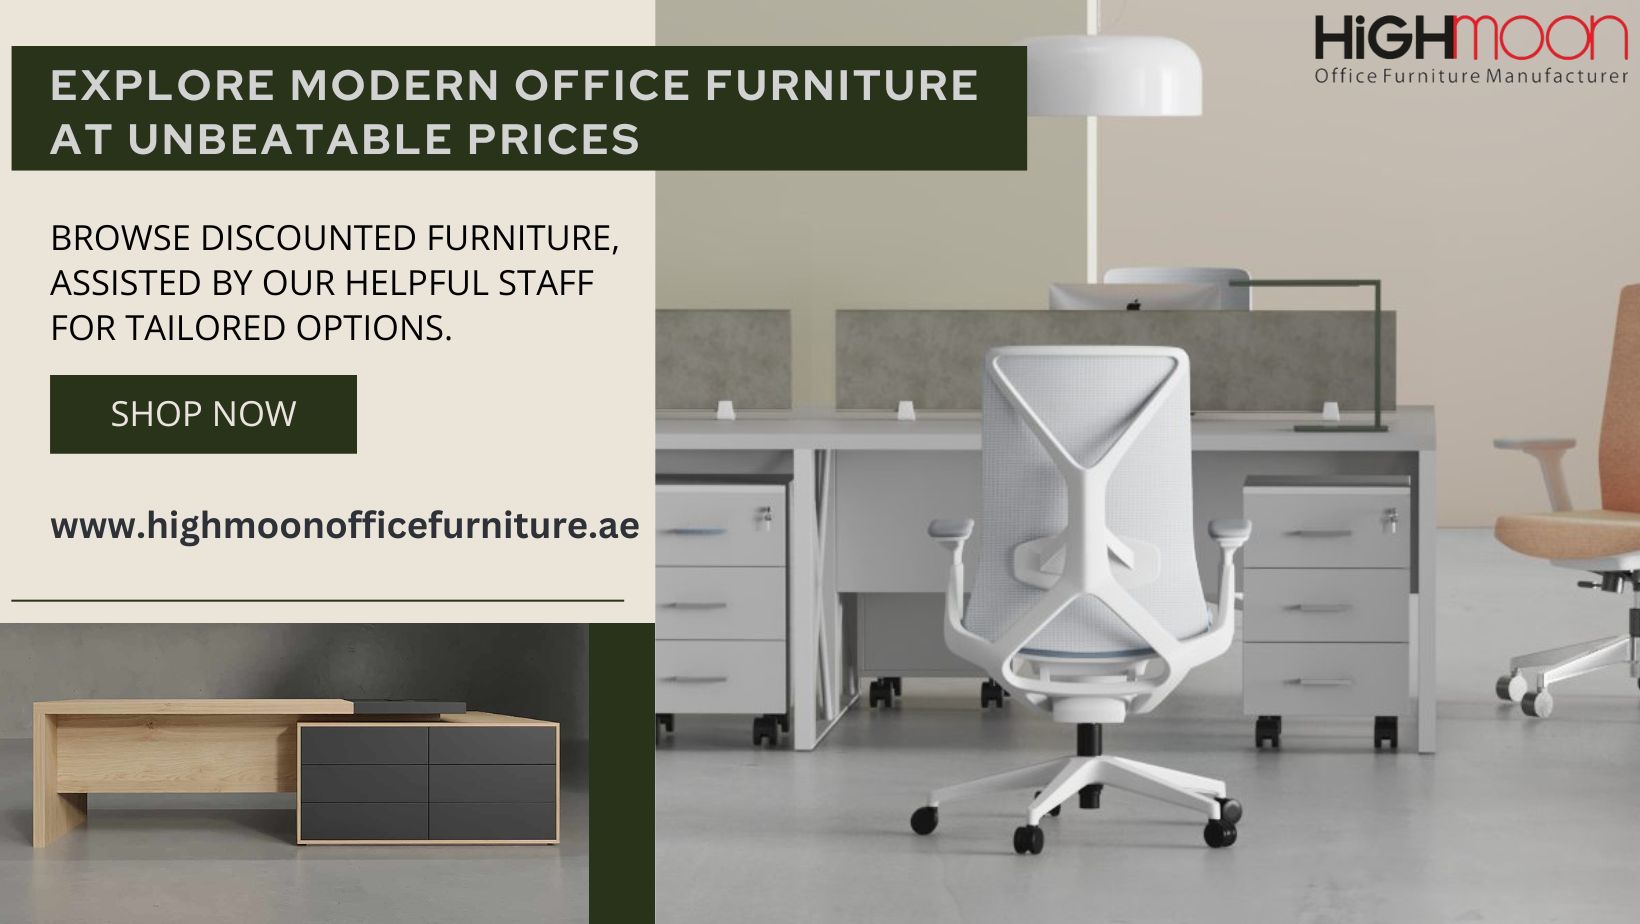 Explore Modern Office Furniture at Unbeatable Prices